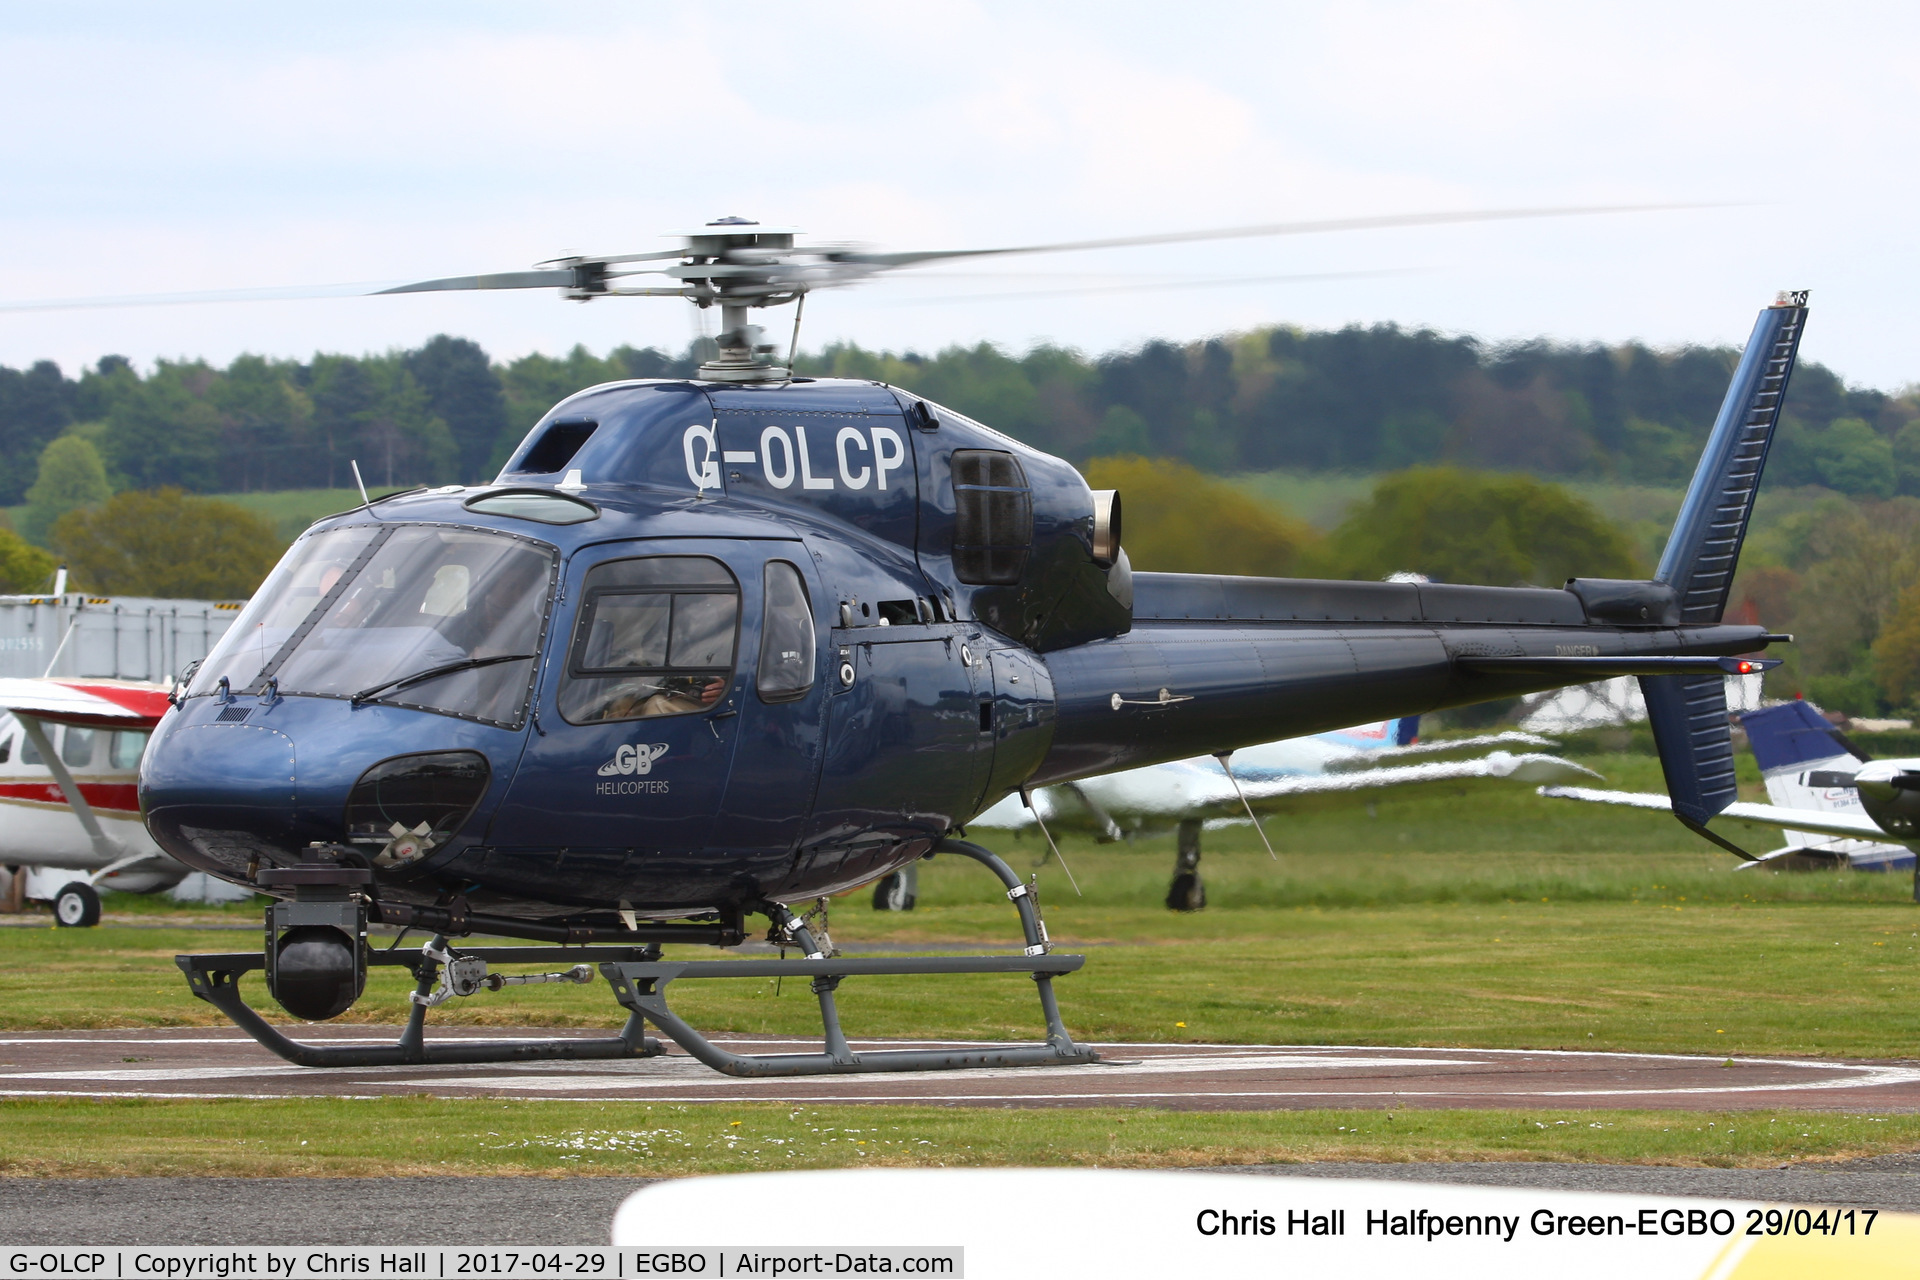 G-OLCP, 1994 Eurocopter AS-355N Ecureuil 2 C/N 5580, at the Radial & Trainer fly-in